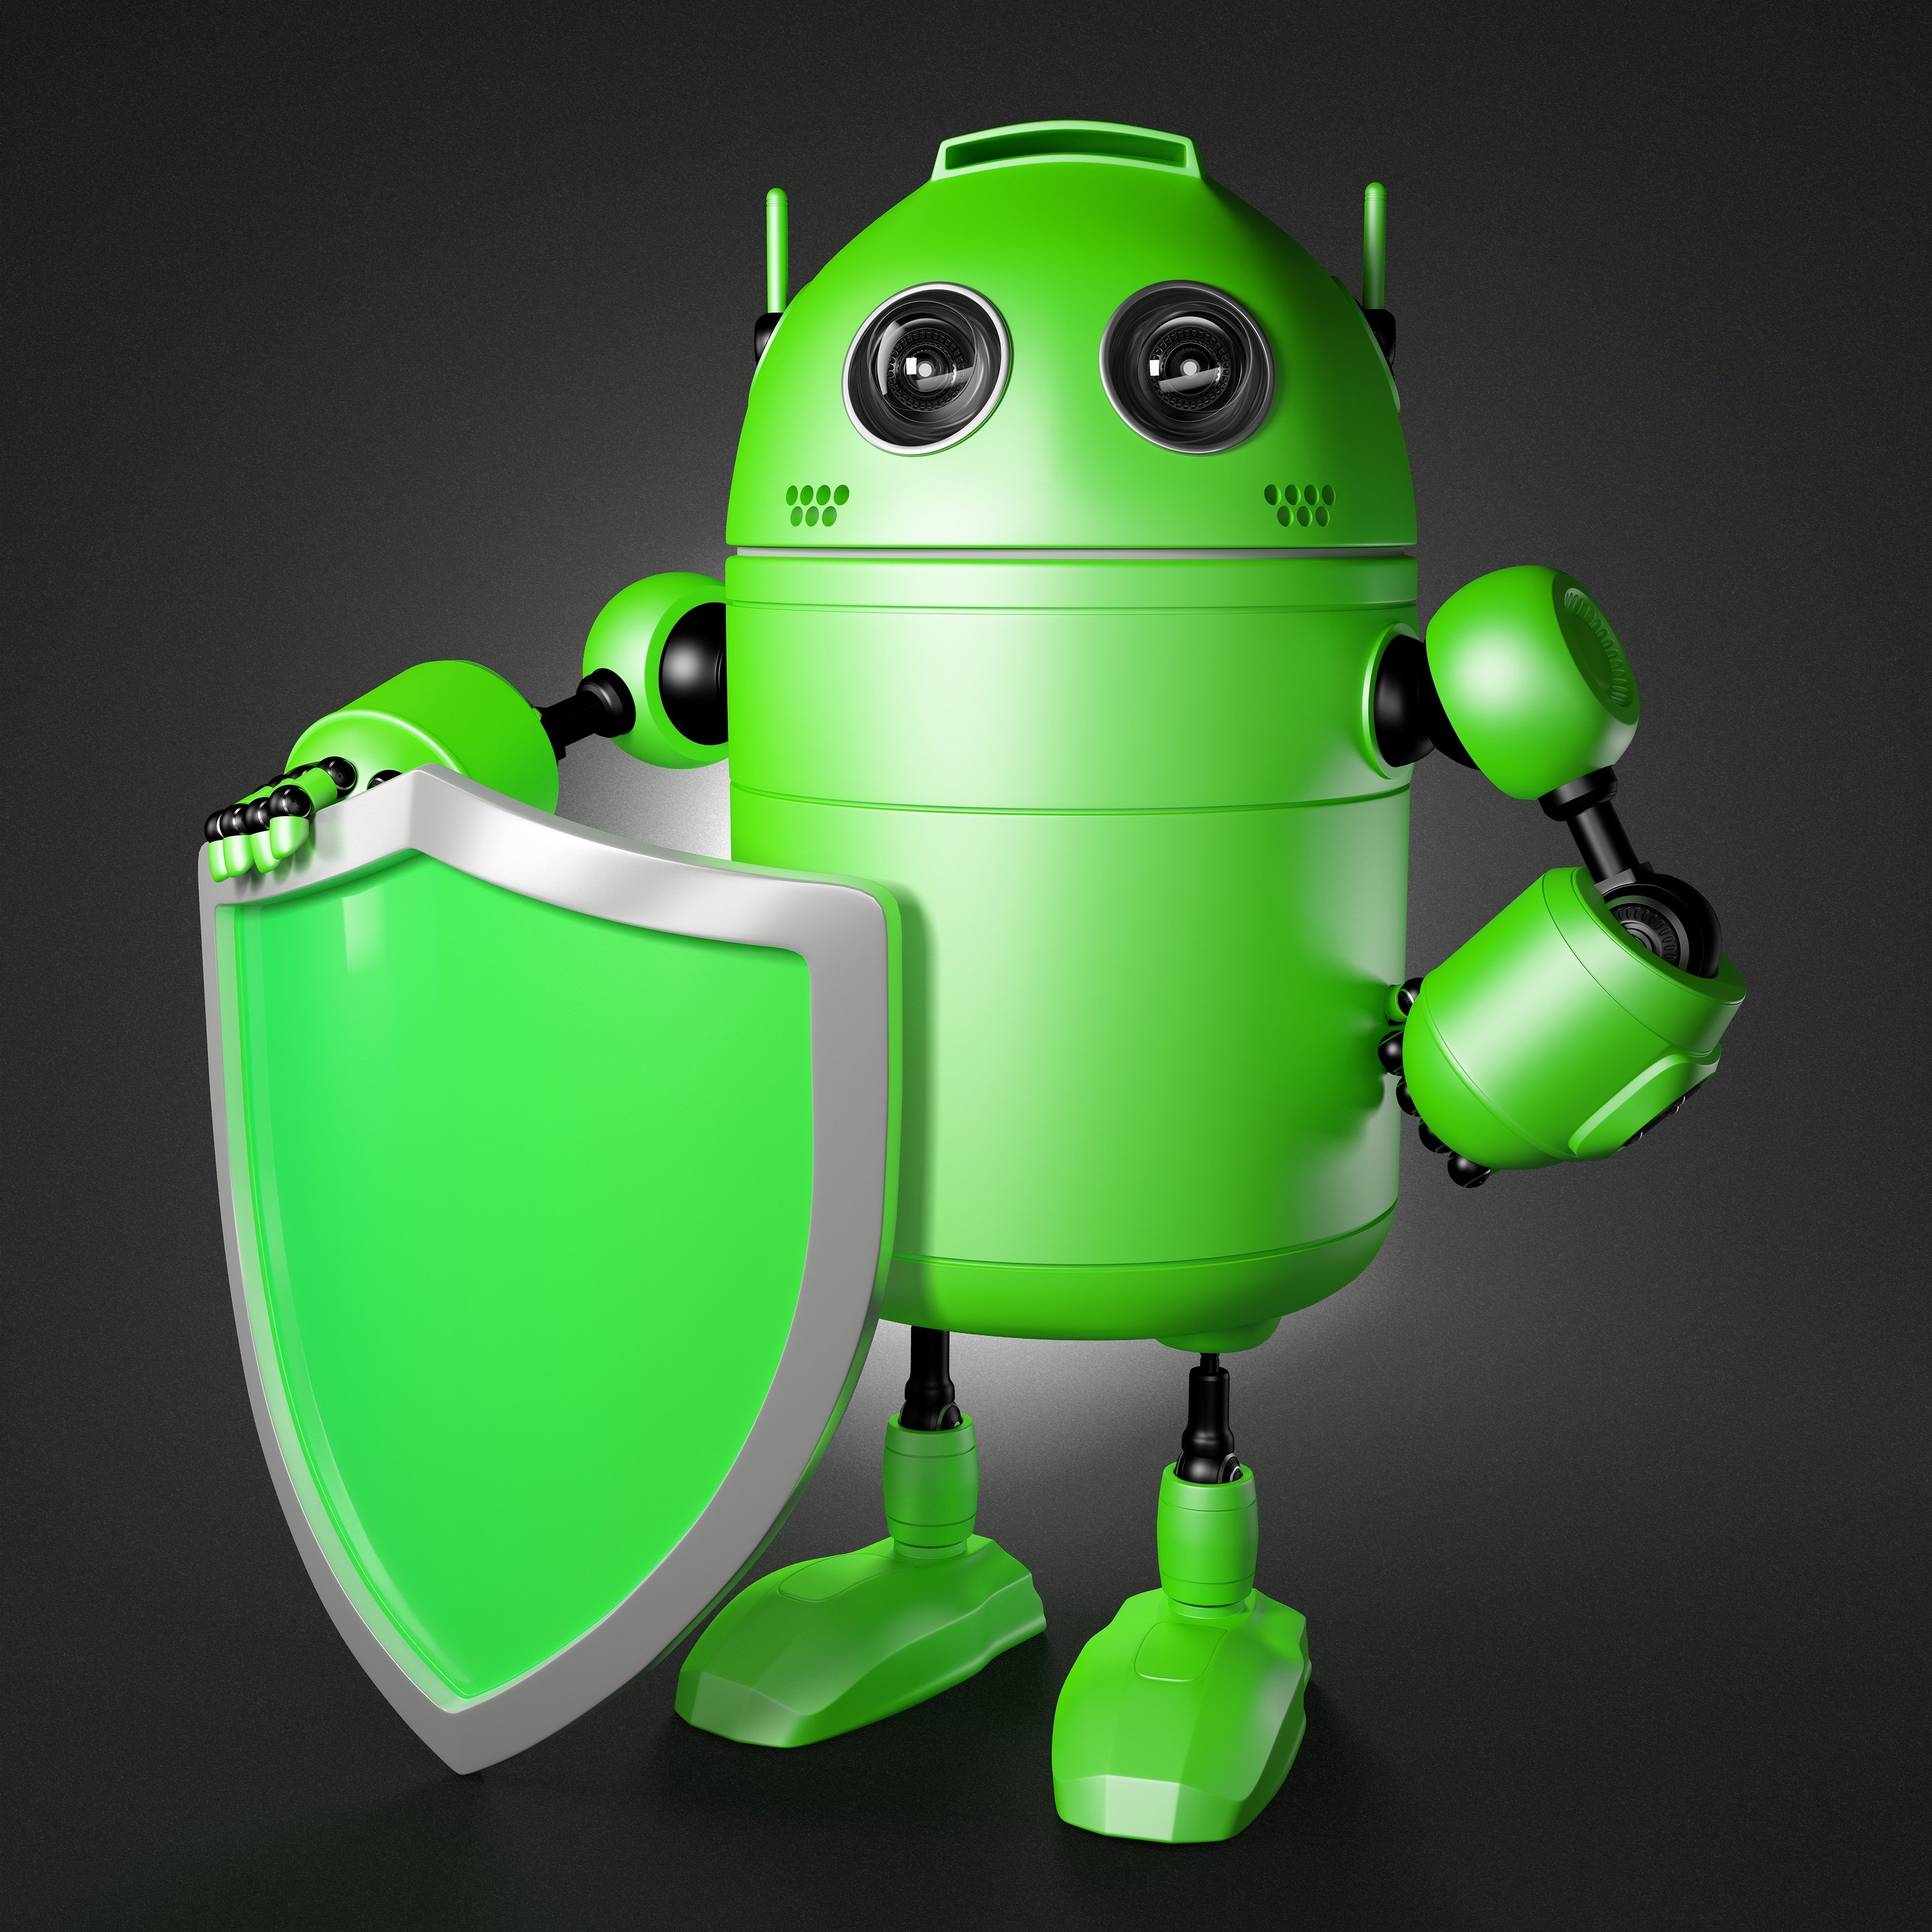 bigstock-Android-Guard-With-Shield-42429826.jpg